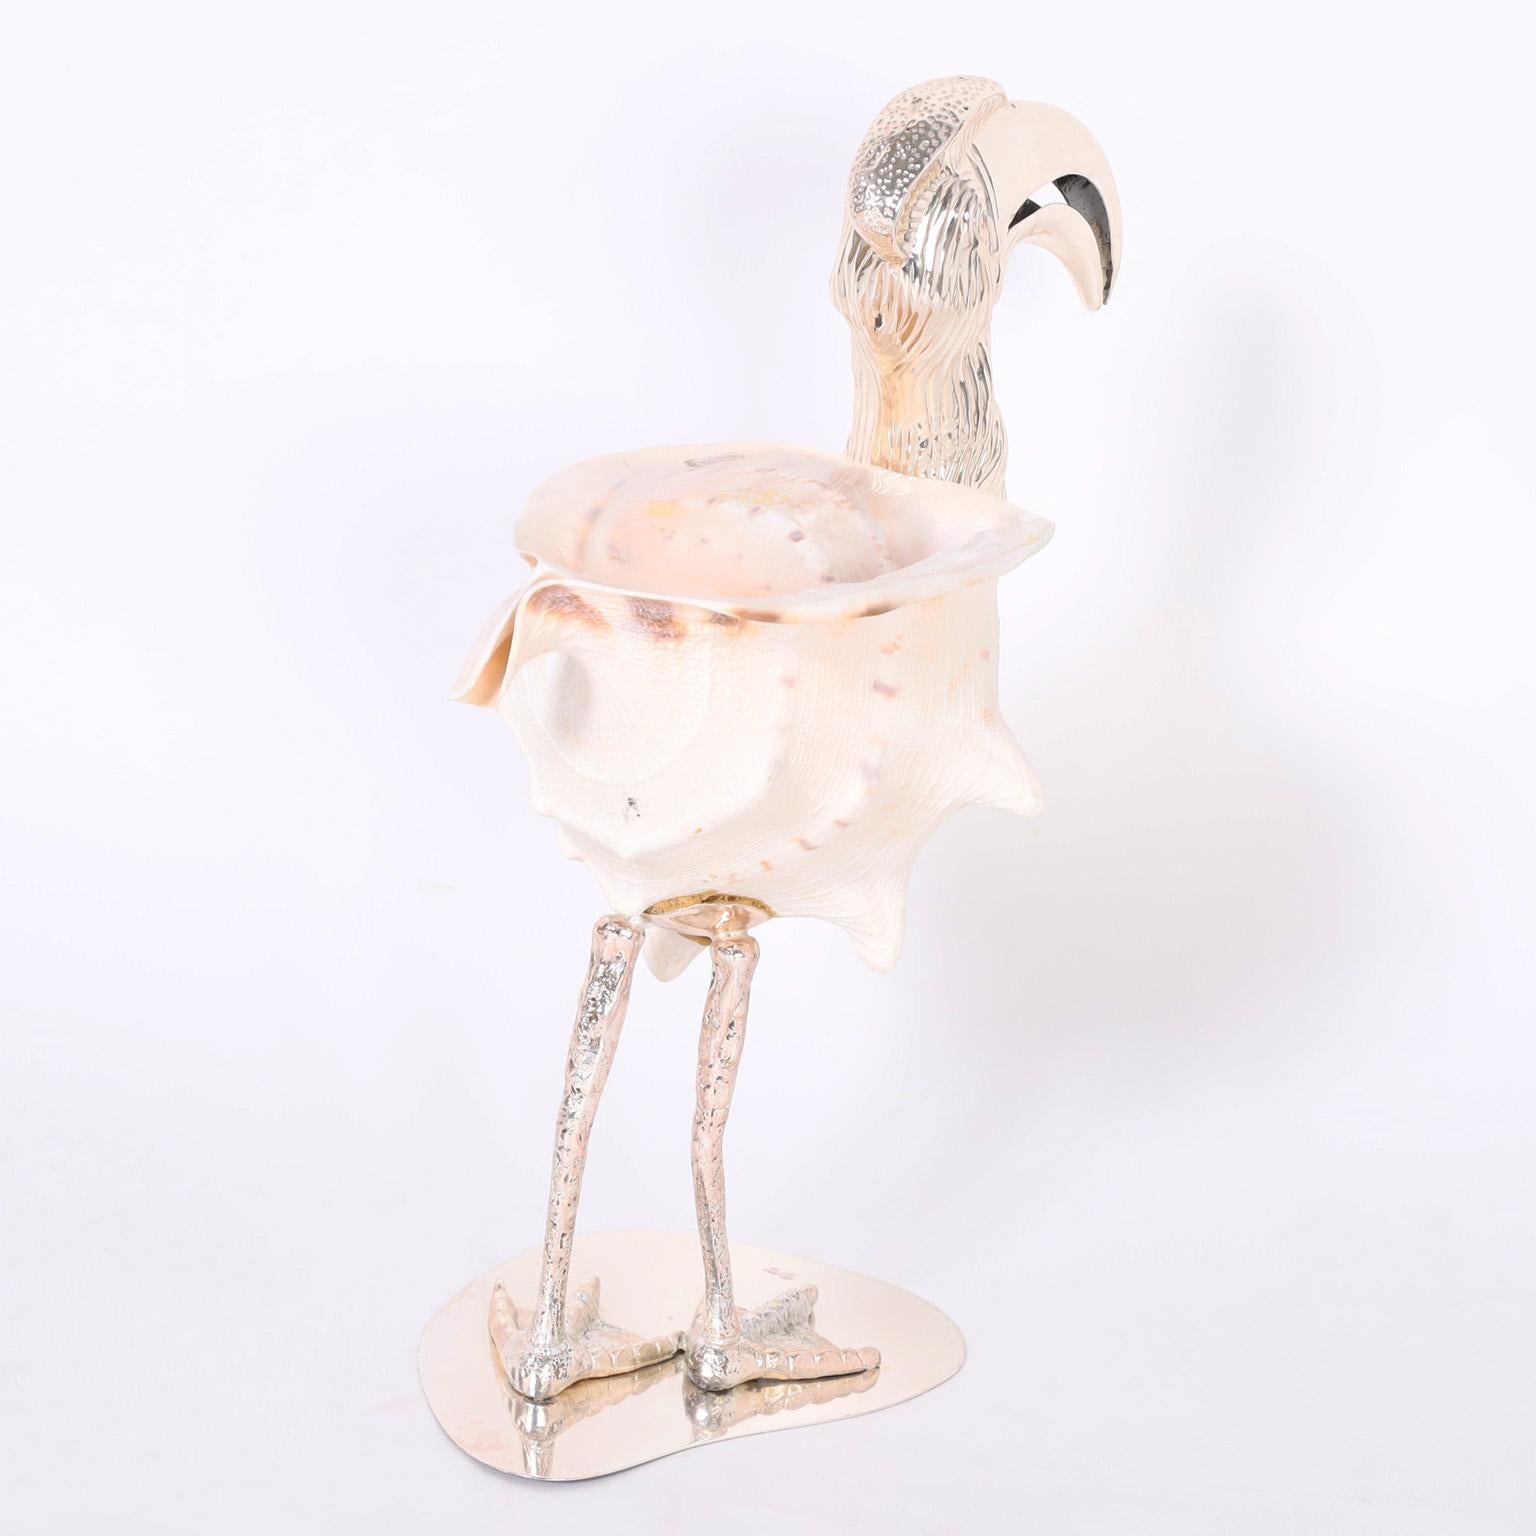 Plated Midcentury Shell and Silver Plate Bird Sculpture by Gabriella Binazzi